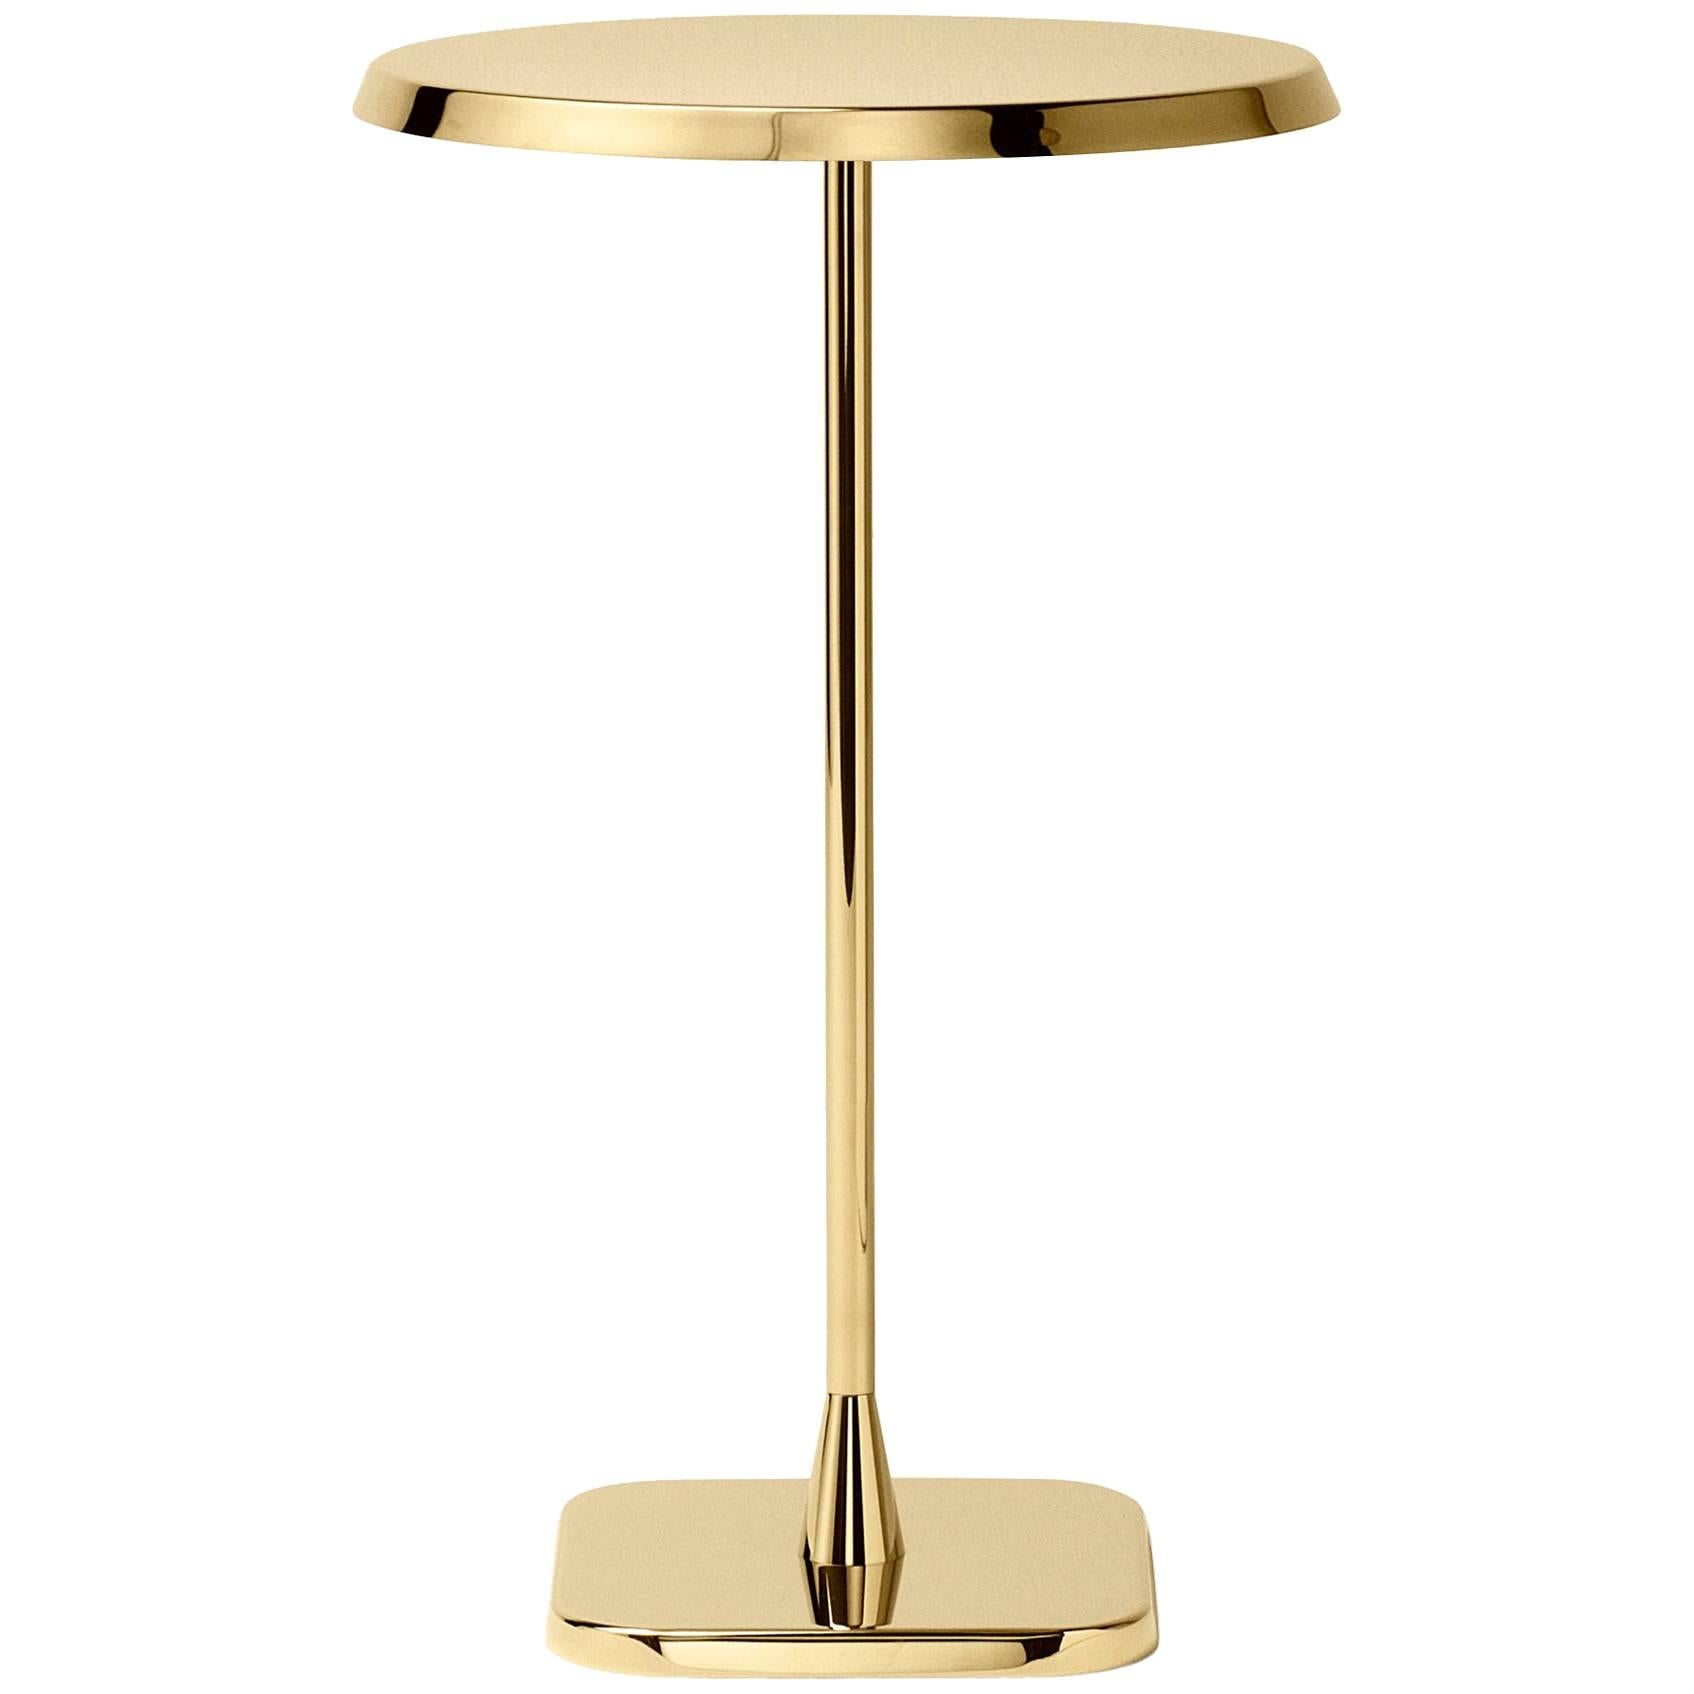 Ghidini 1961 Opera Small Round Side Table in High Brass Finish